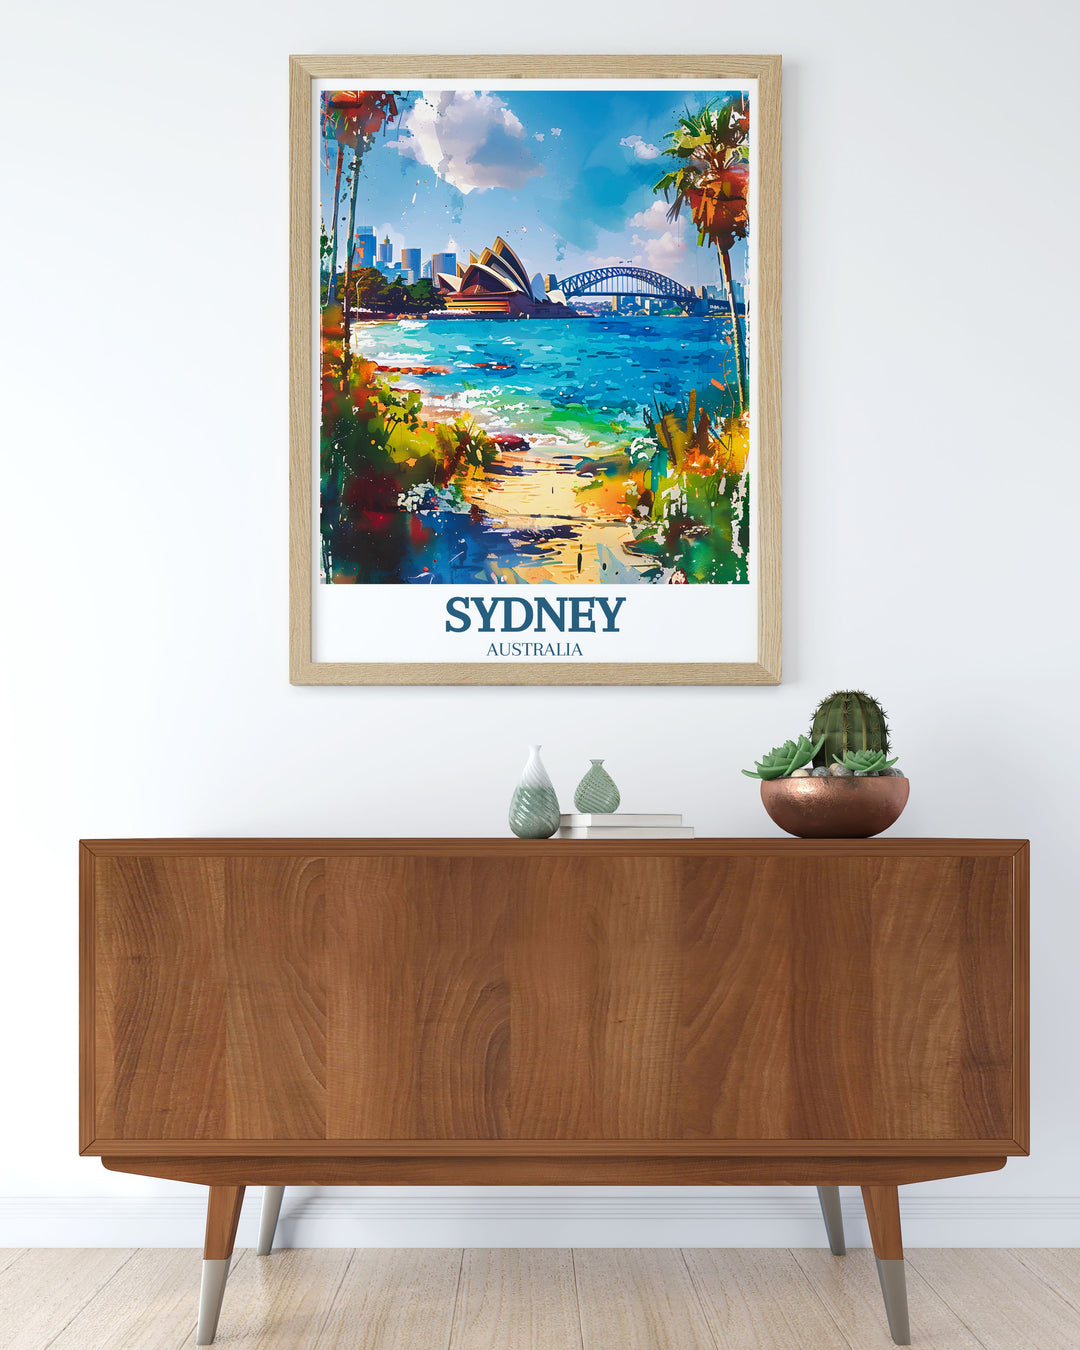 Artistic depiction of the Sydney Opera House and Sydney Harbour Bridge in a captivating vintage style perfect for transforming your home decor with a splash of Australian beauty and a reminder of the iconic landmarks of Sydney